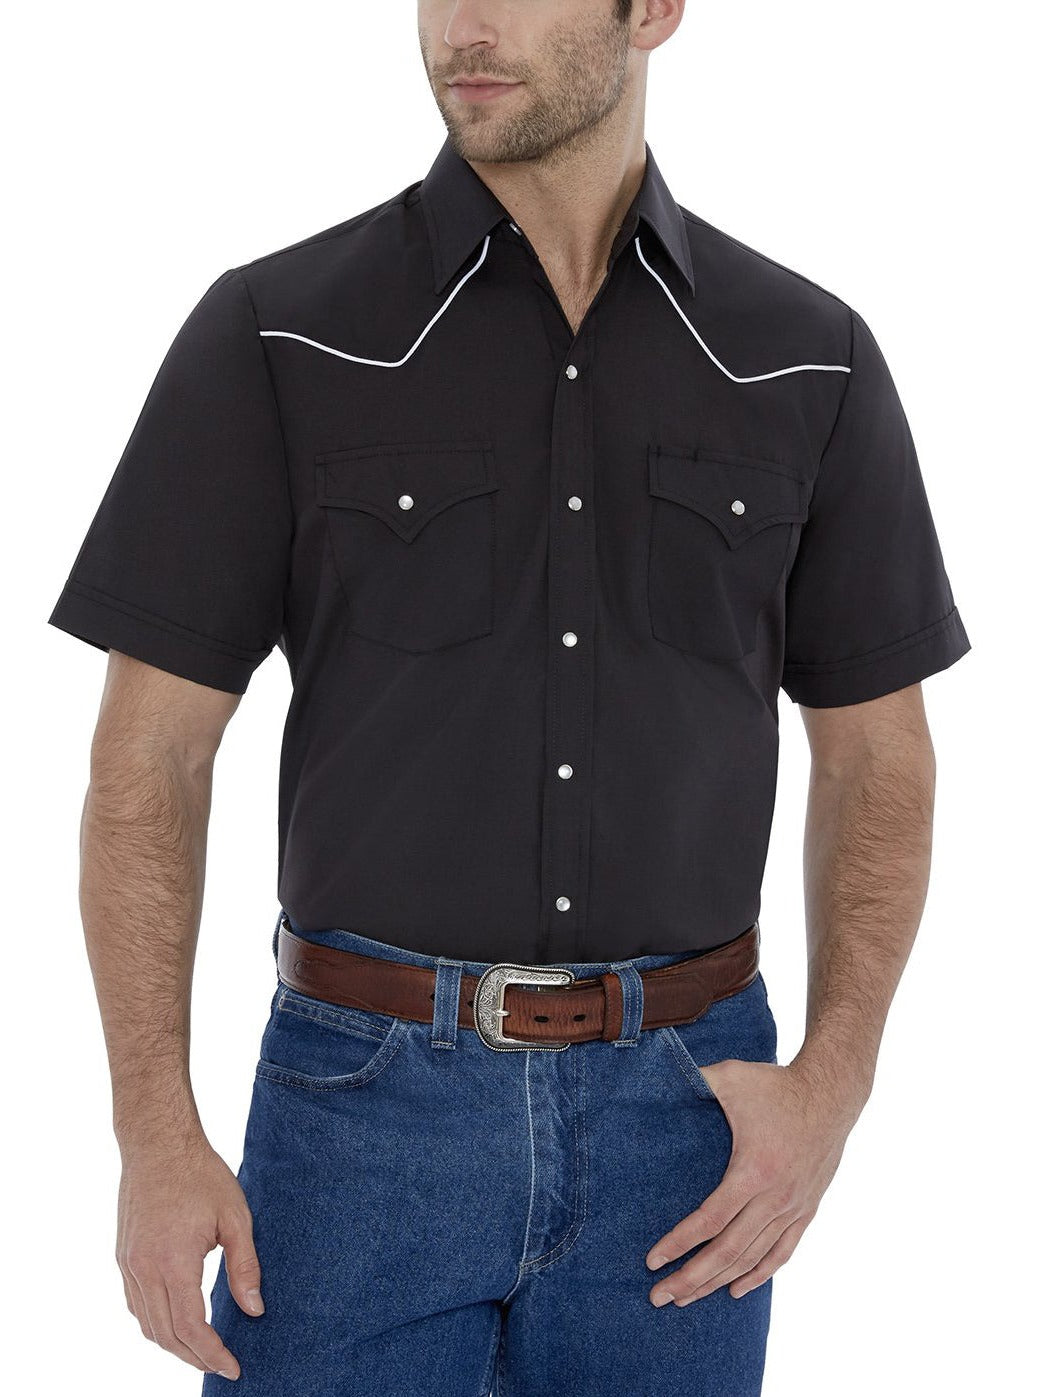 Men's Short Sleeve Solid Western Shirt with Contrast Piping in Black | Ely Cattleman